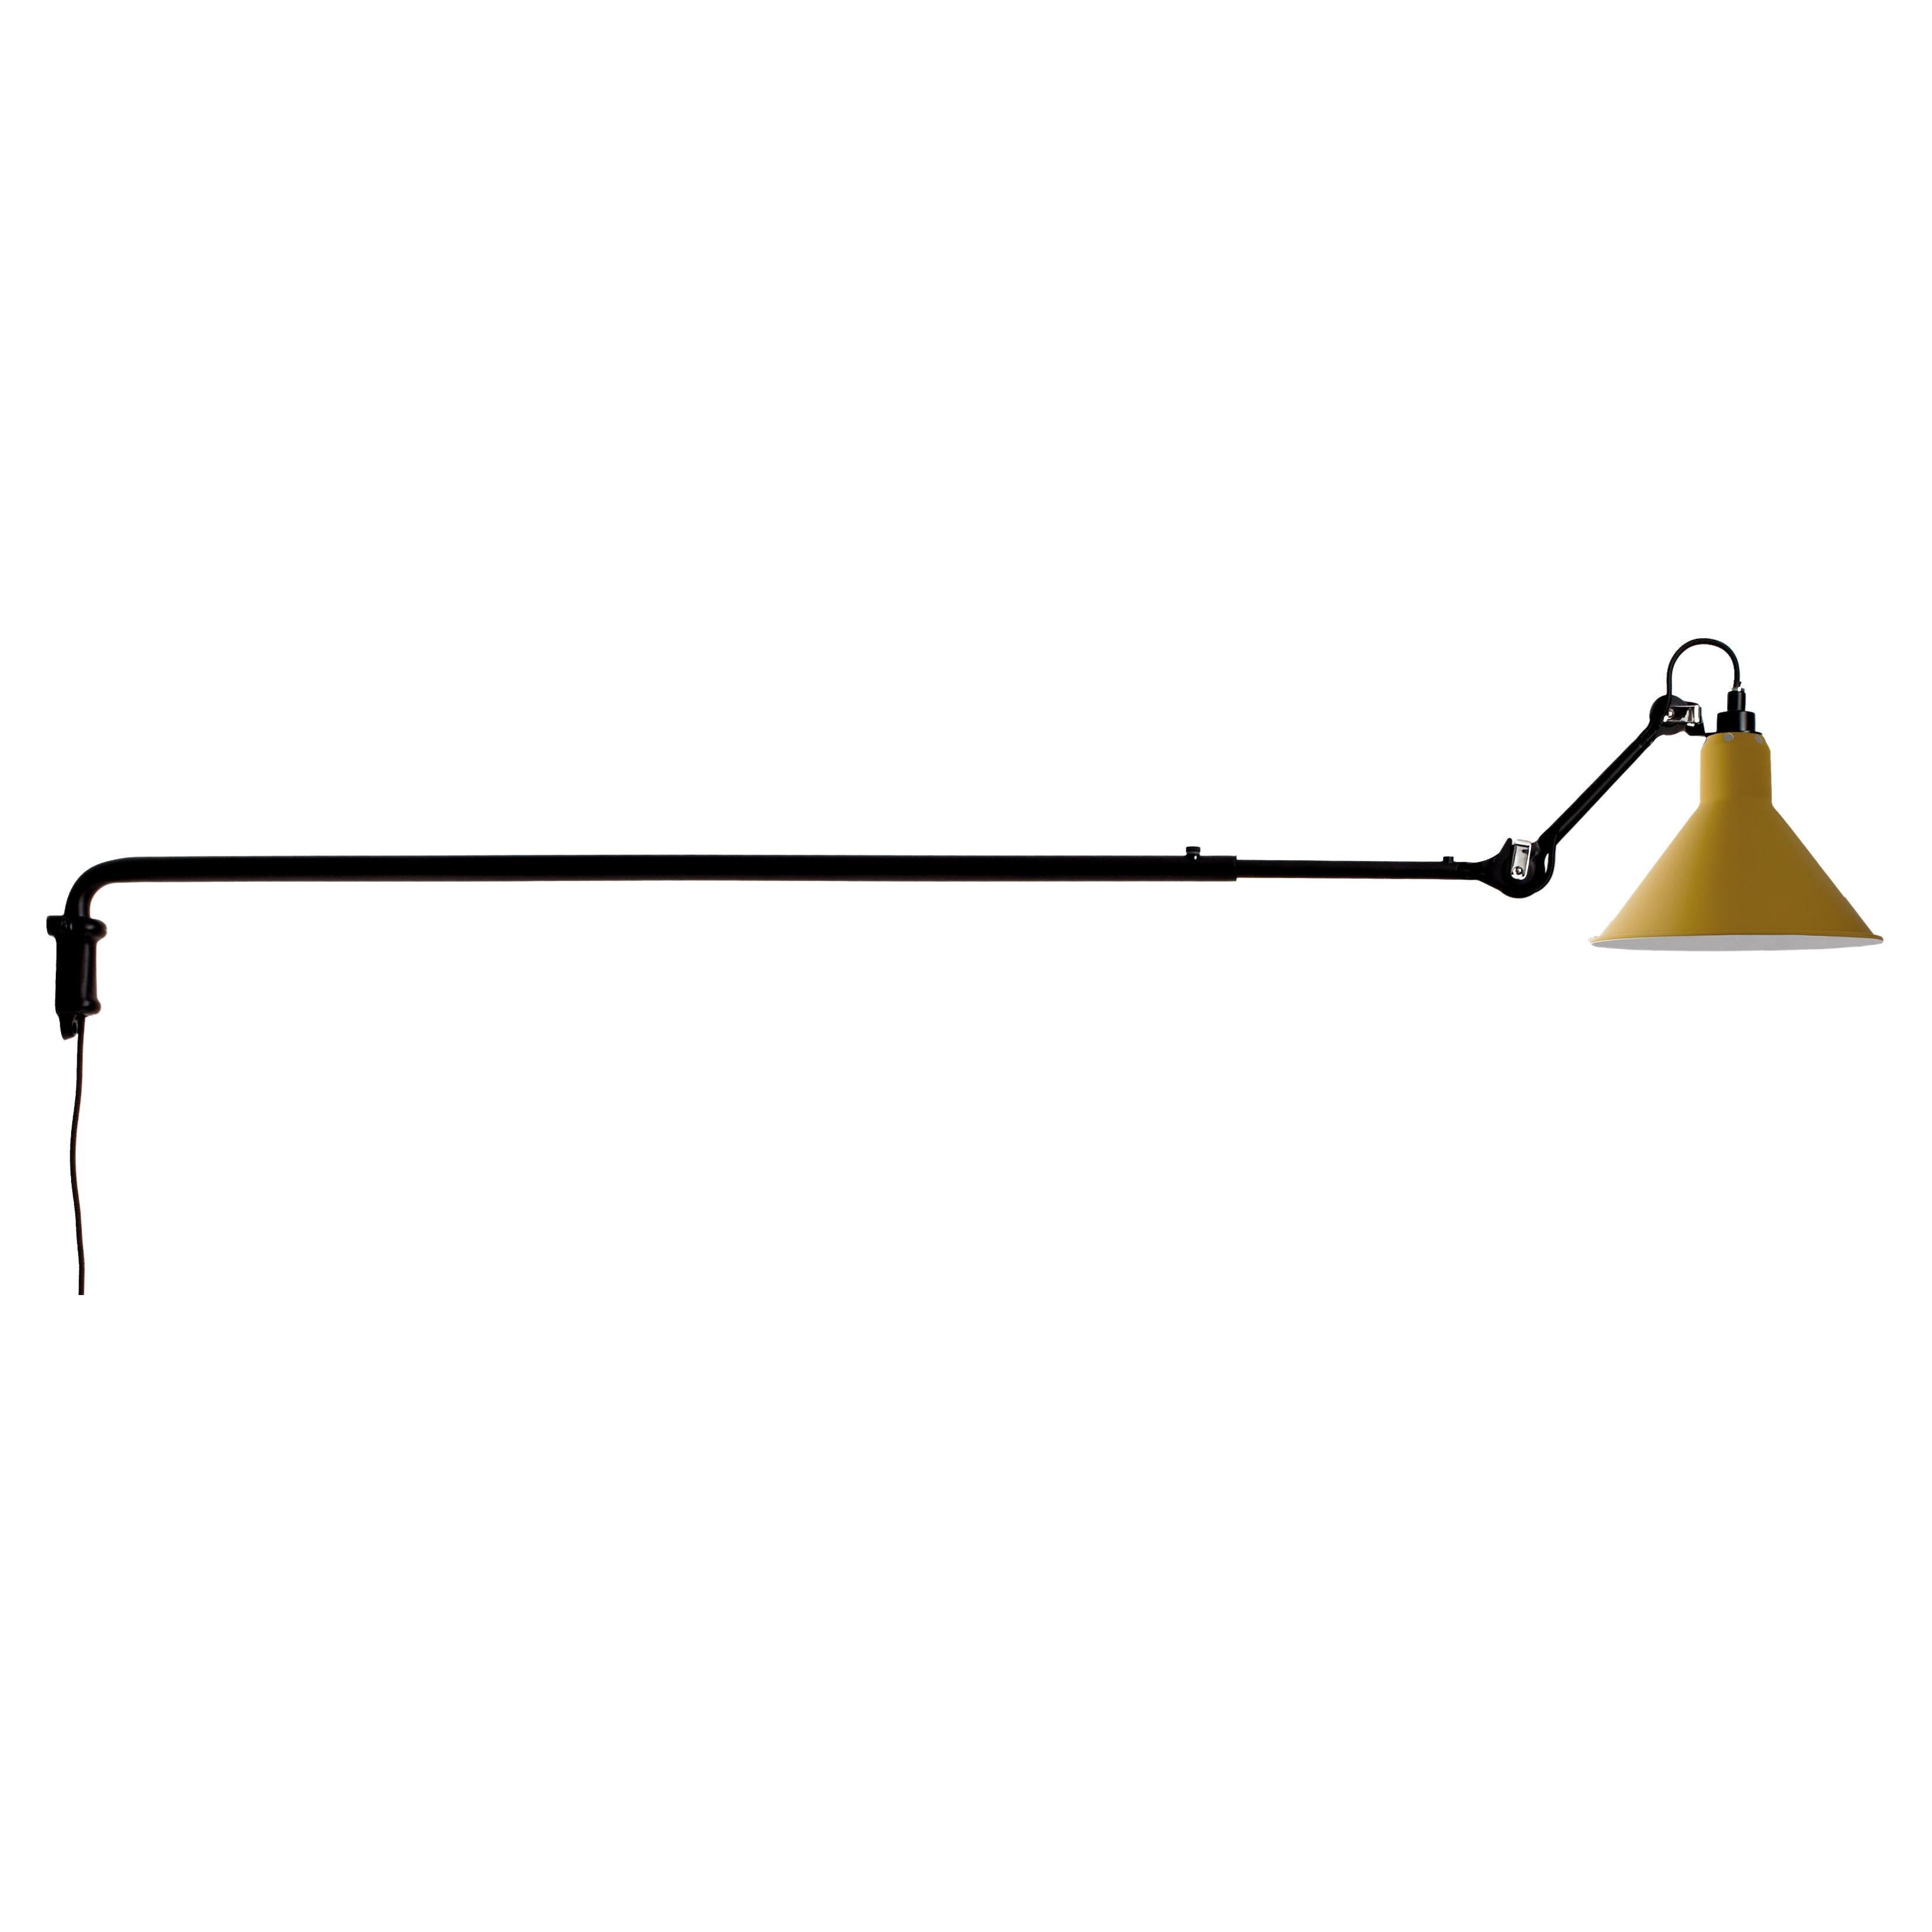 DCW Editions La Lampe Gras N°213 Wall Lamp in Black Arm and Yellow Shade For Sale